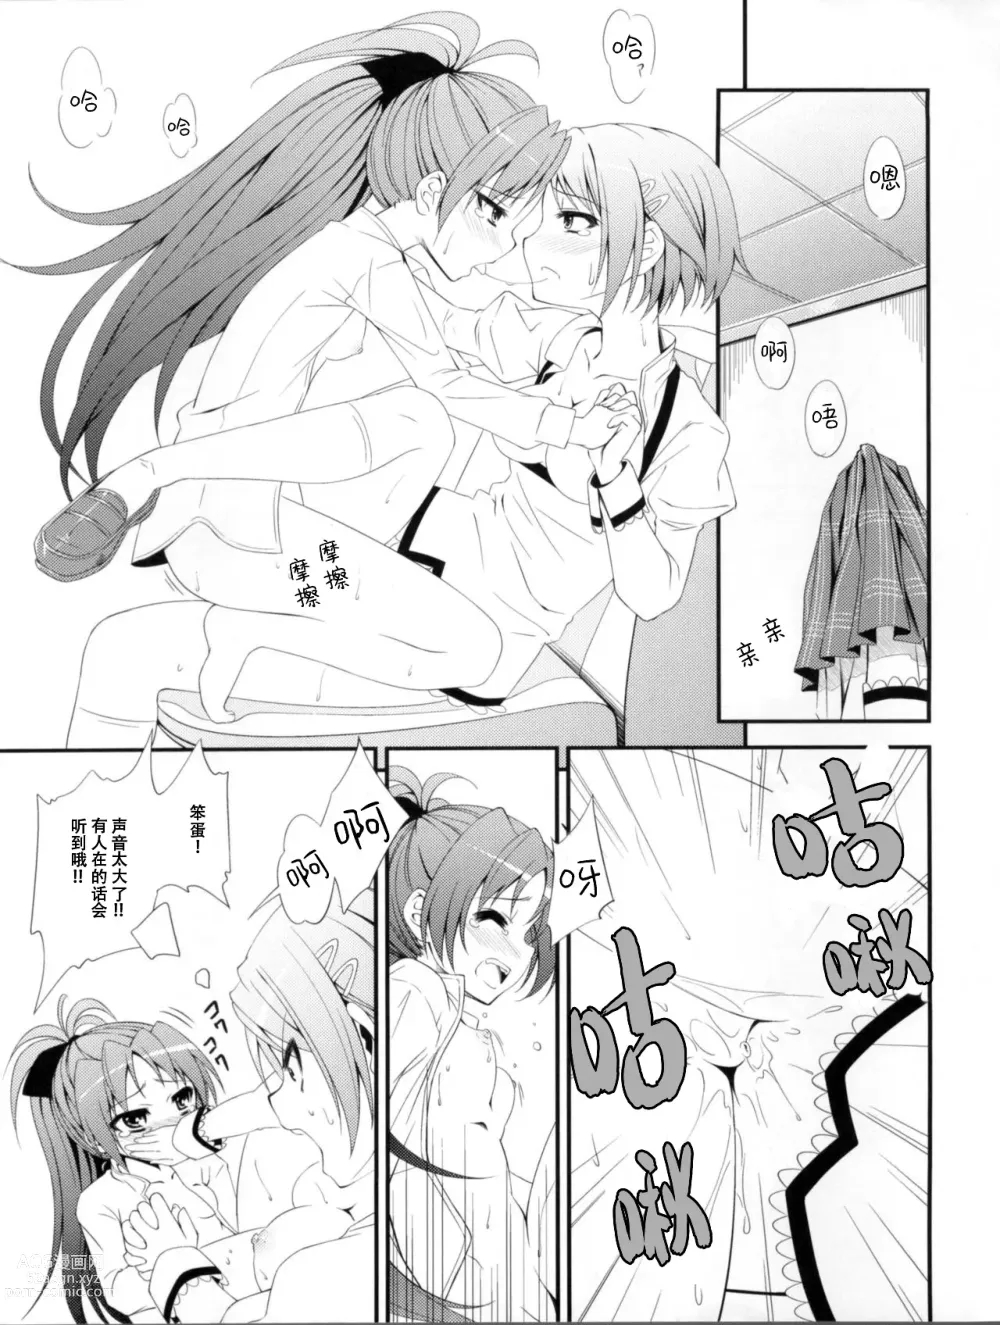 Page 18 of doujinshi Lovely Girls Lily vol. 2